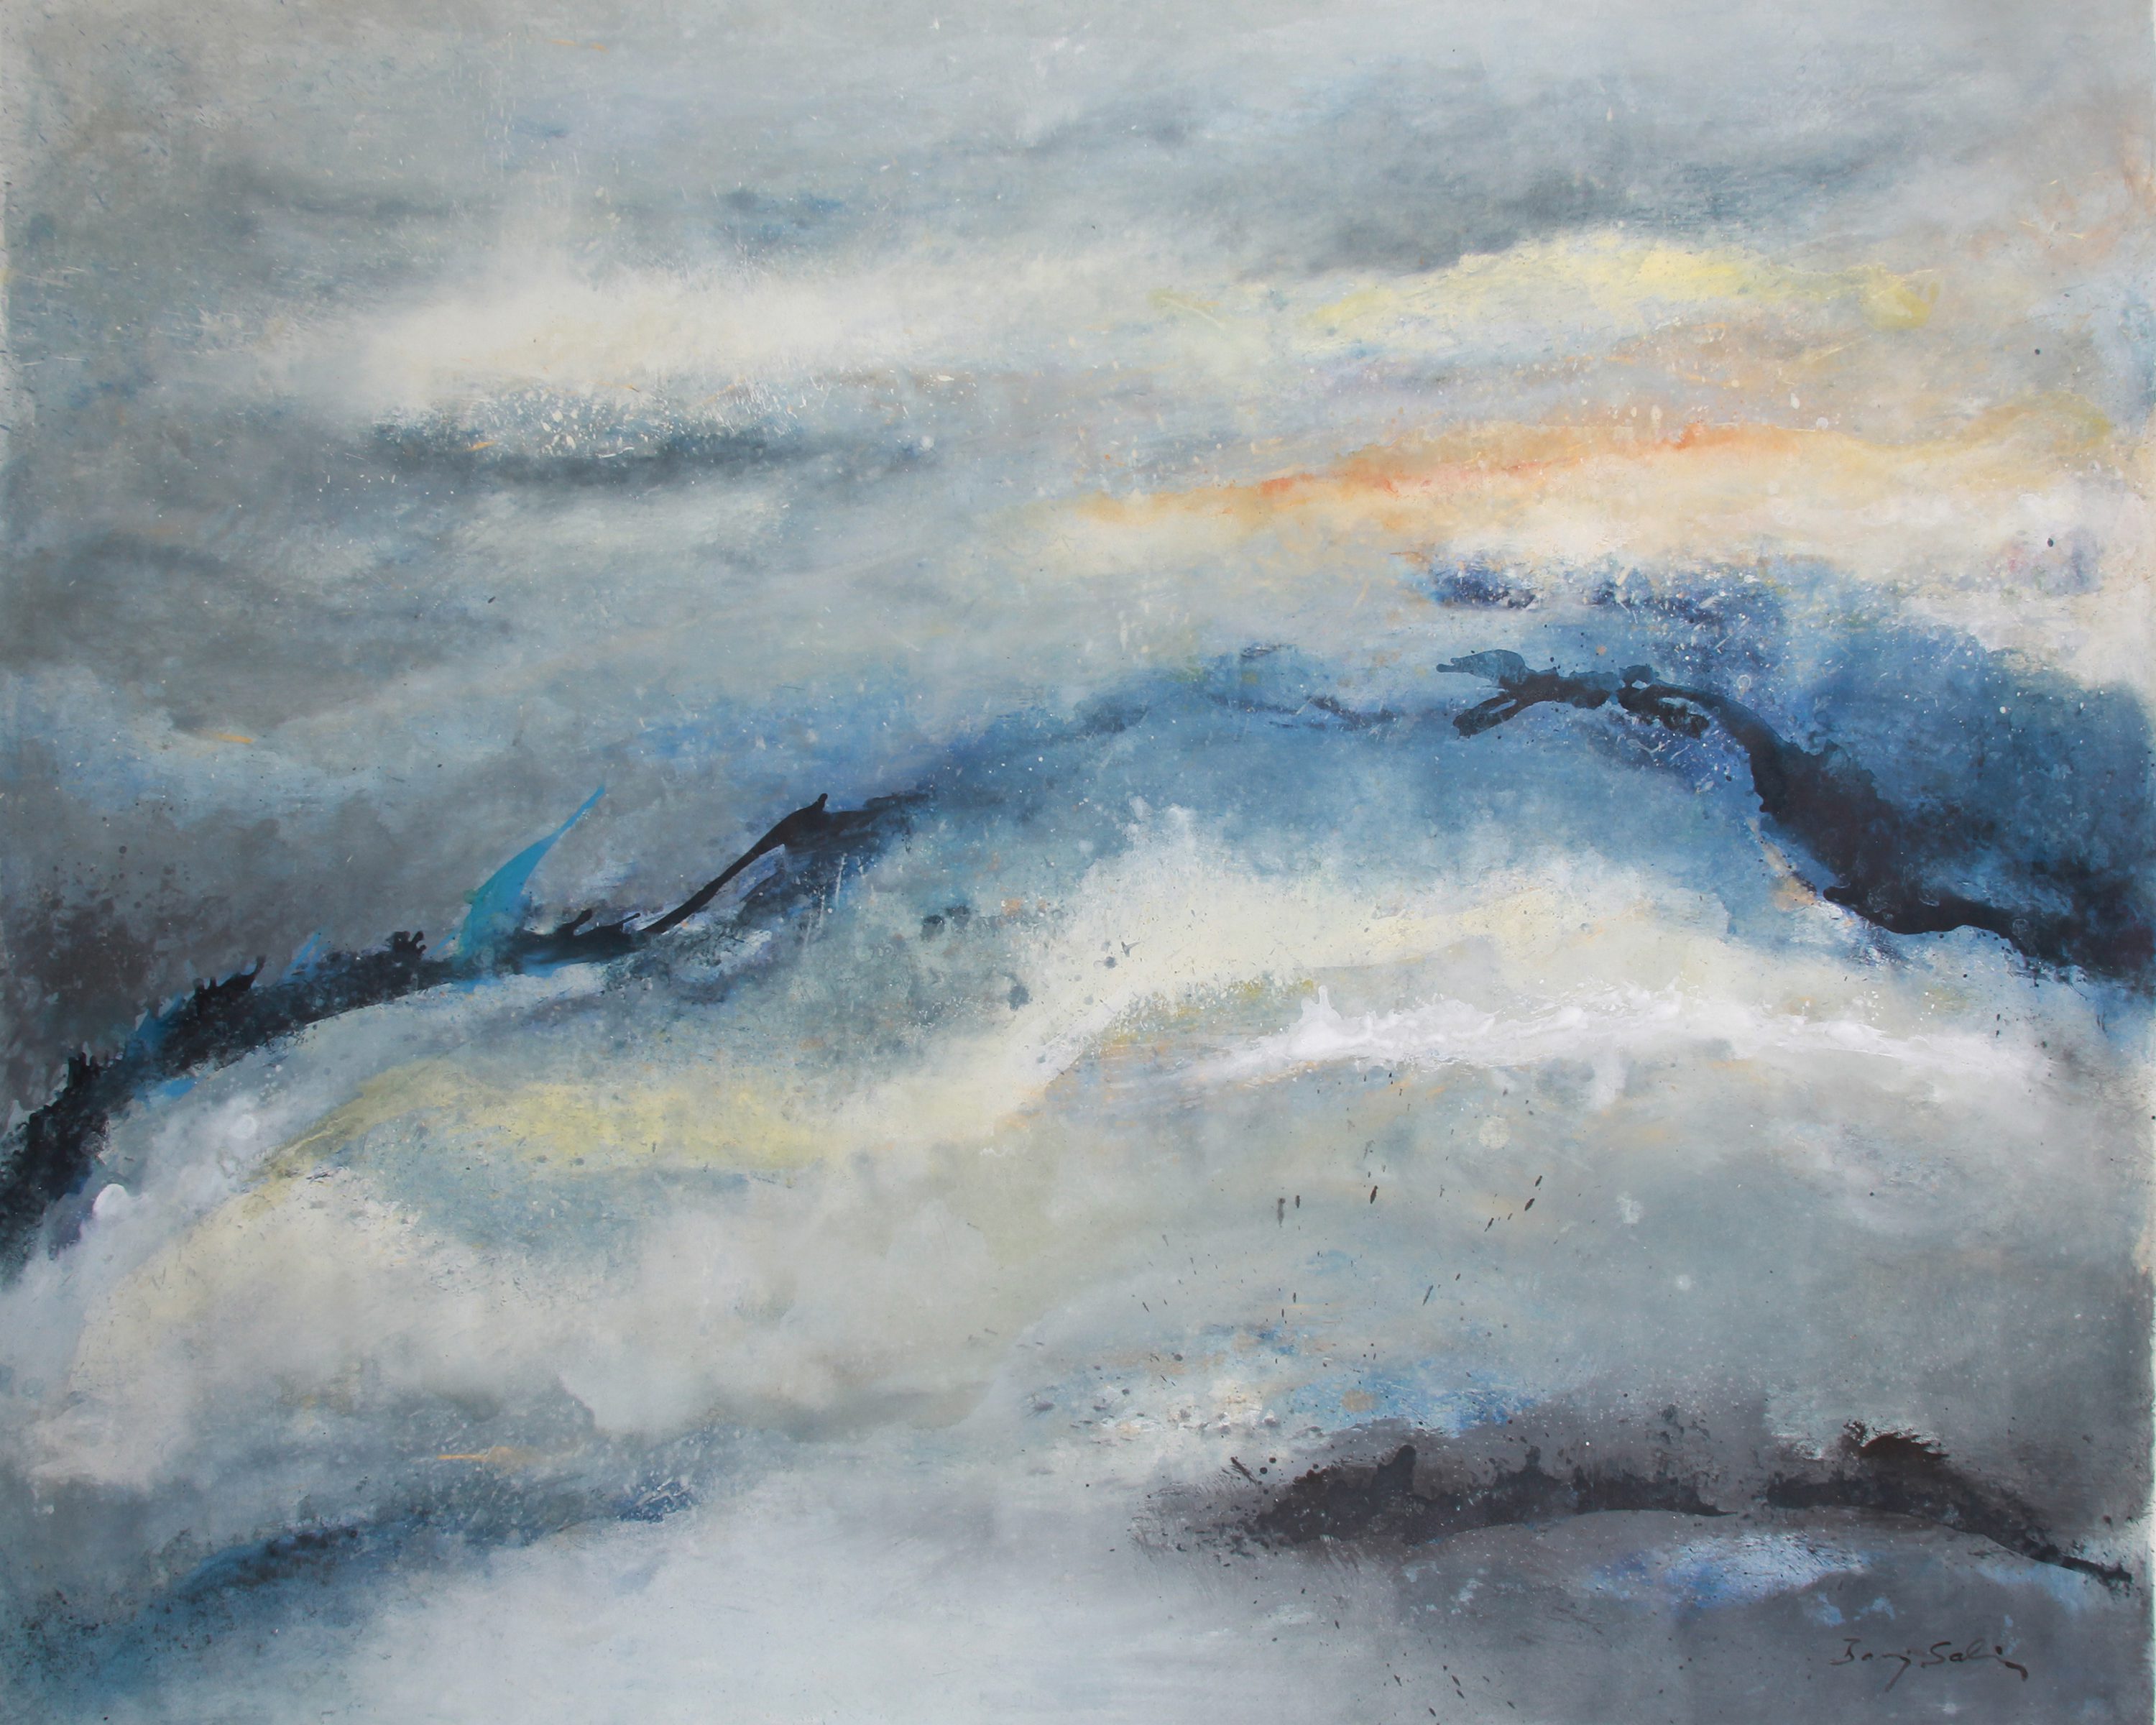 LANGUAGE OF THE CLOUDS, acrylic on canvas, 72"x86", 2014